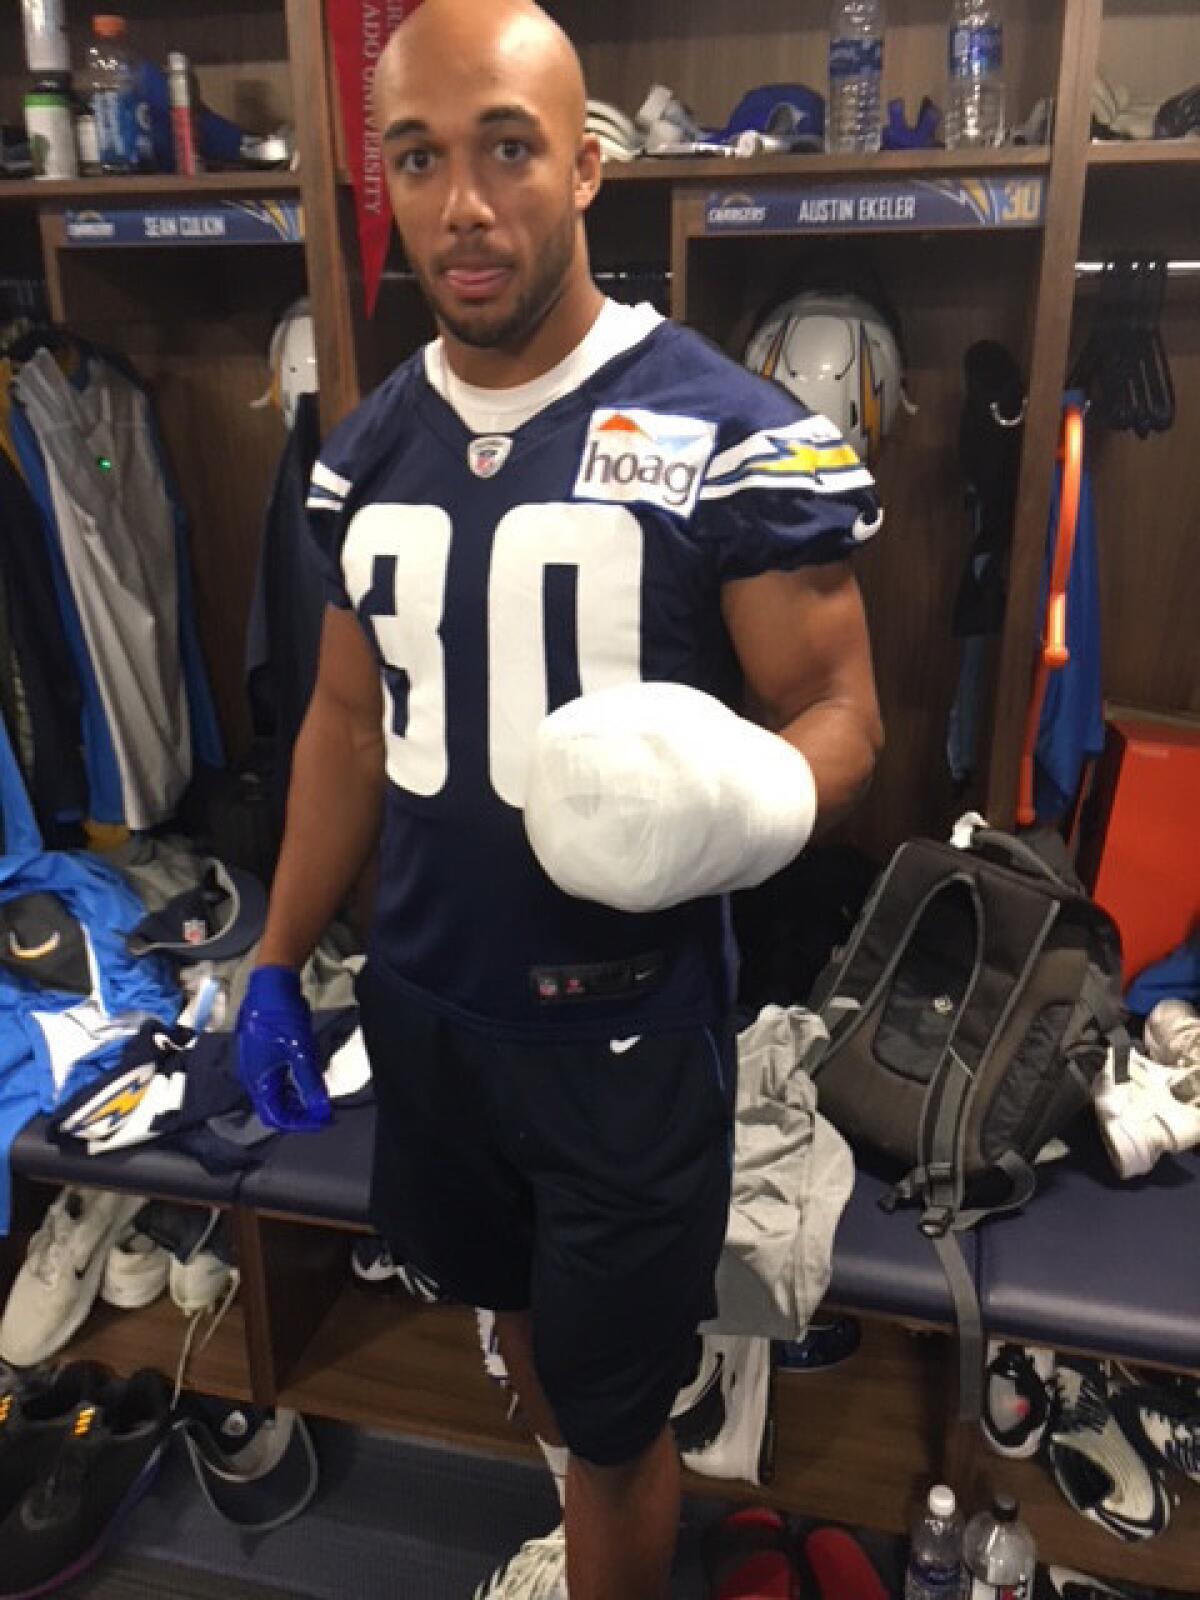 “It feels like I have my hand in a fist,” says Chargers running back Austin Ekeler, shown with his wrapped broken hand.